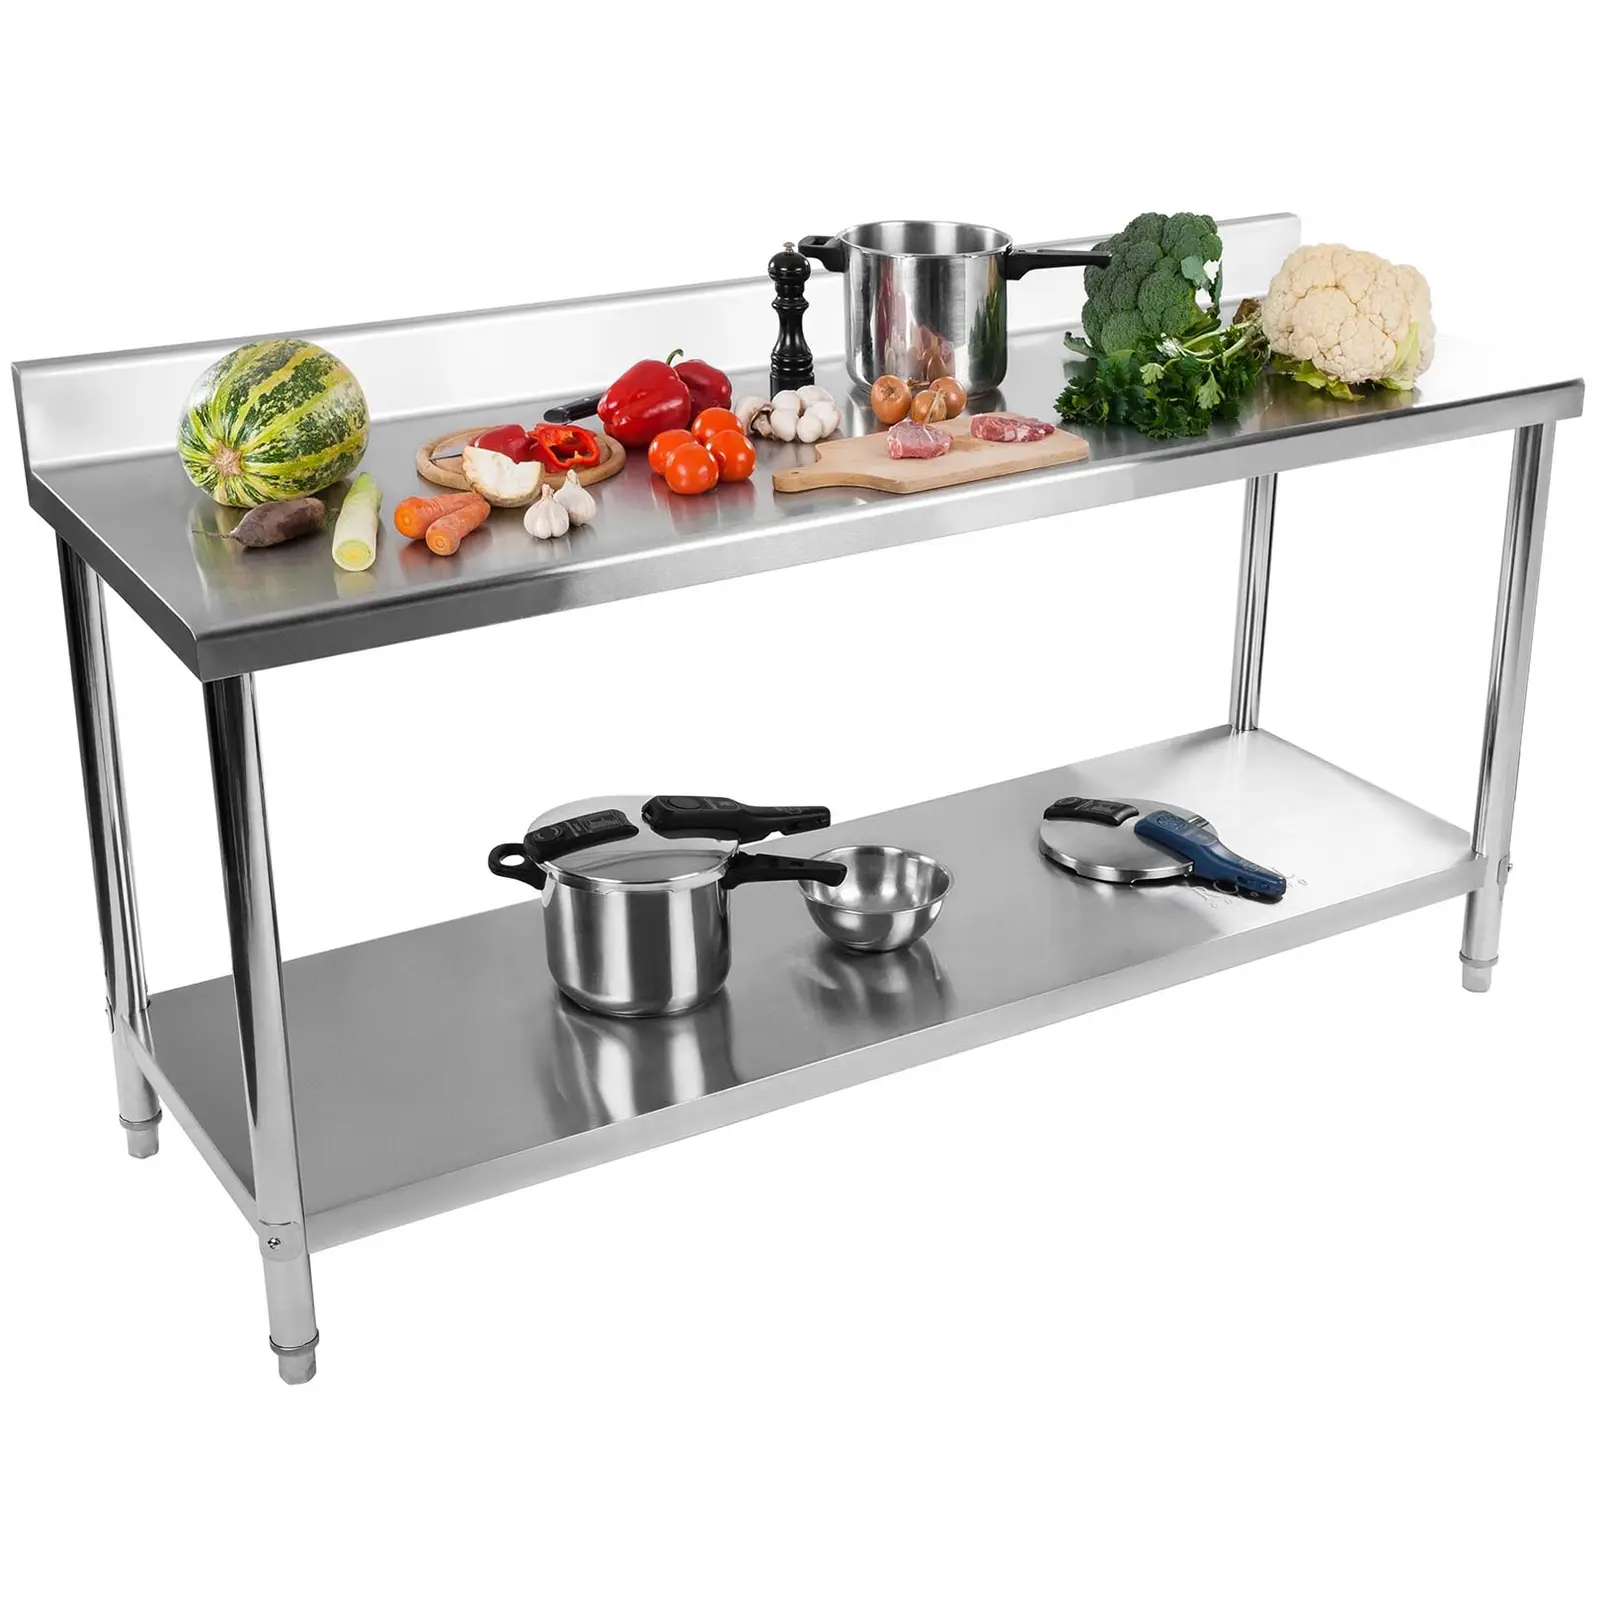 Stainless Steel Table - 200 x 60 cm - Upstand - 160 kg carrying capacity